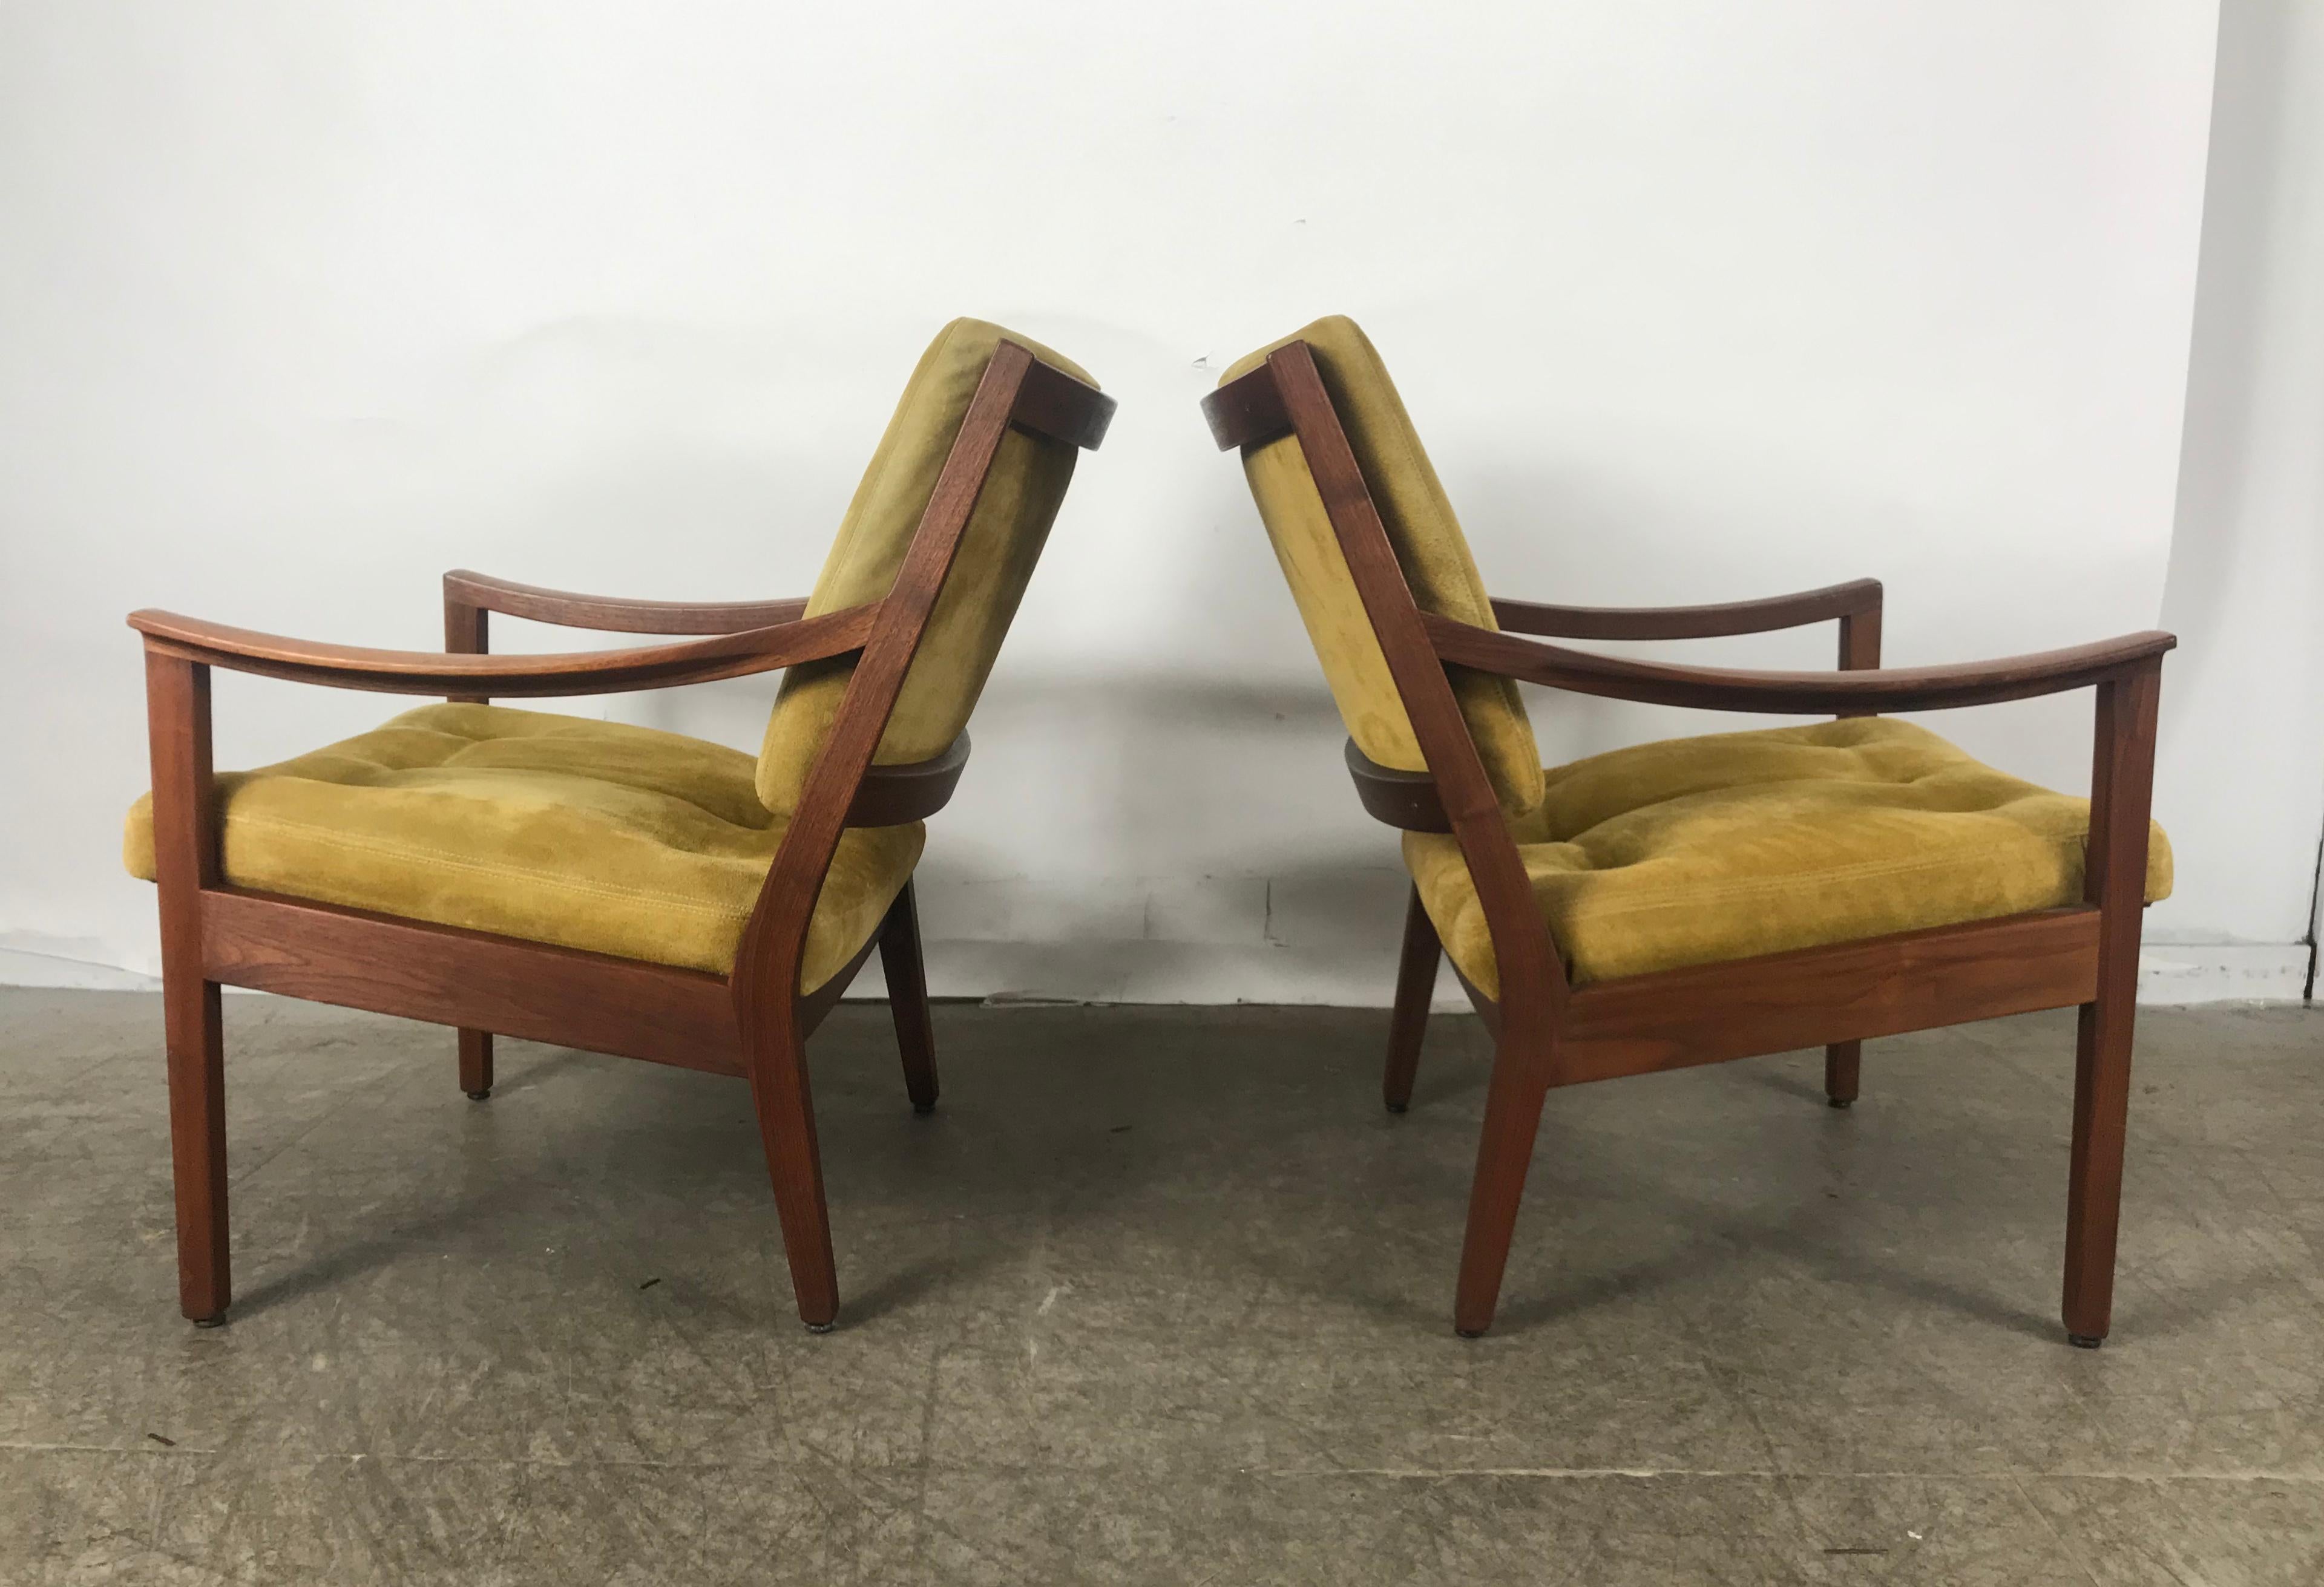 Mid-20th Century Stunning Pair Modernist Walnut and Suede Lounge Chairs by Gunlocke